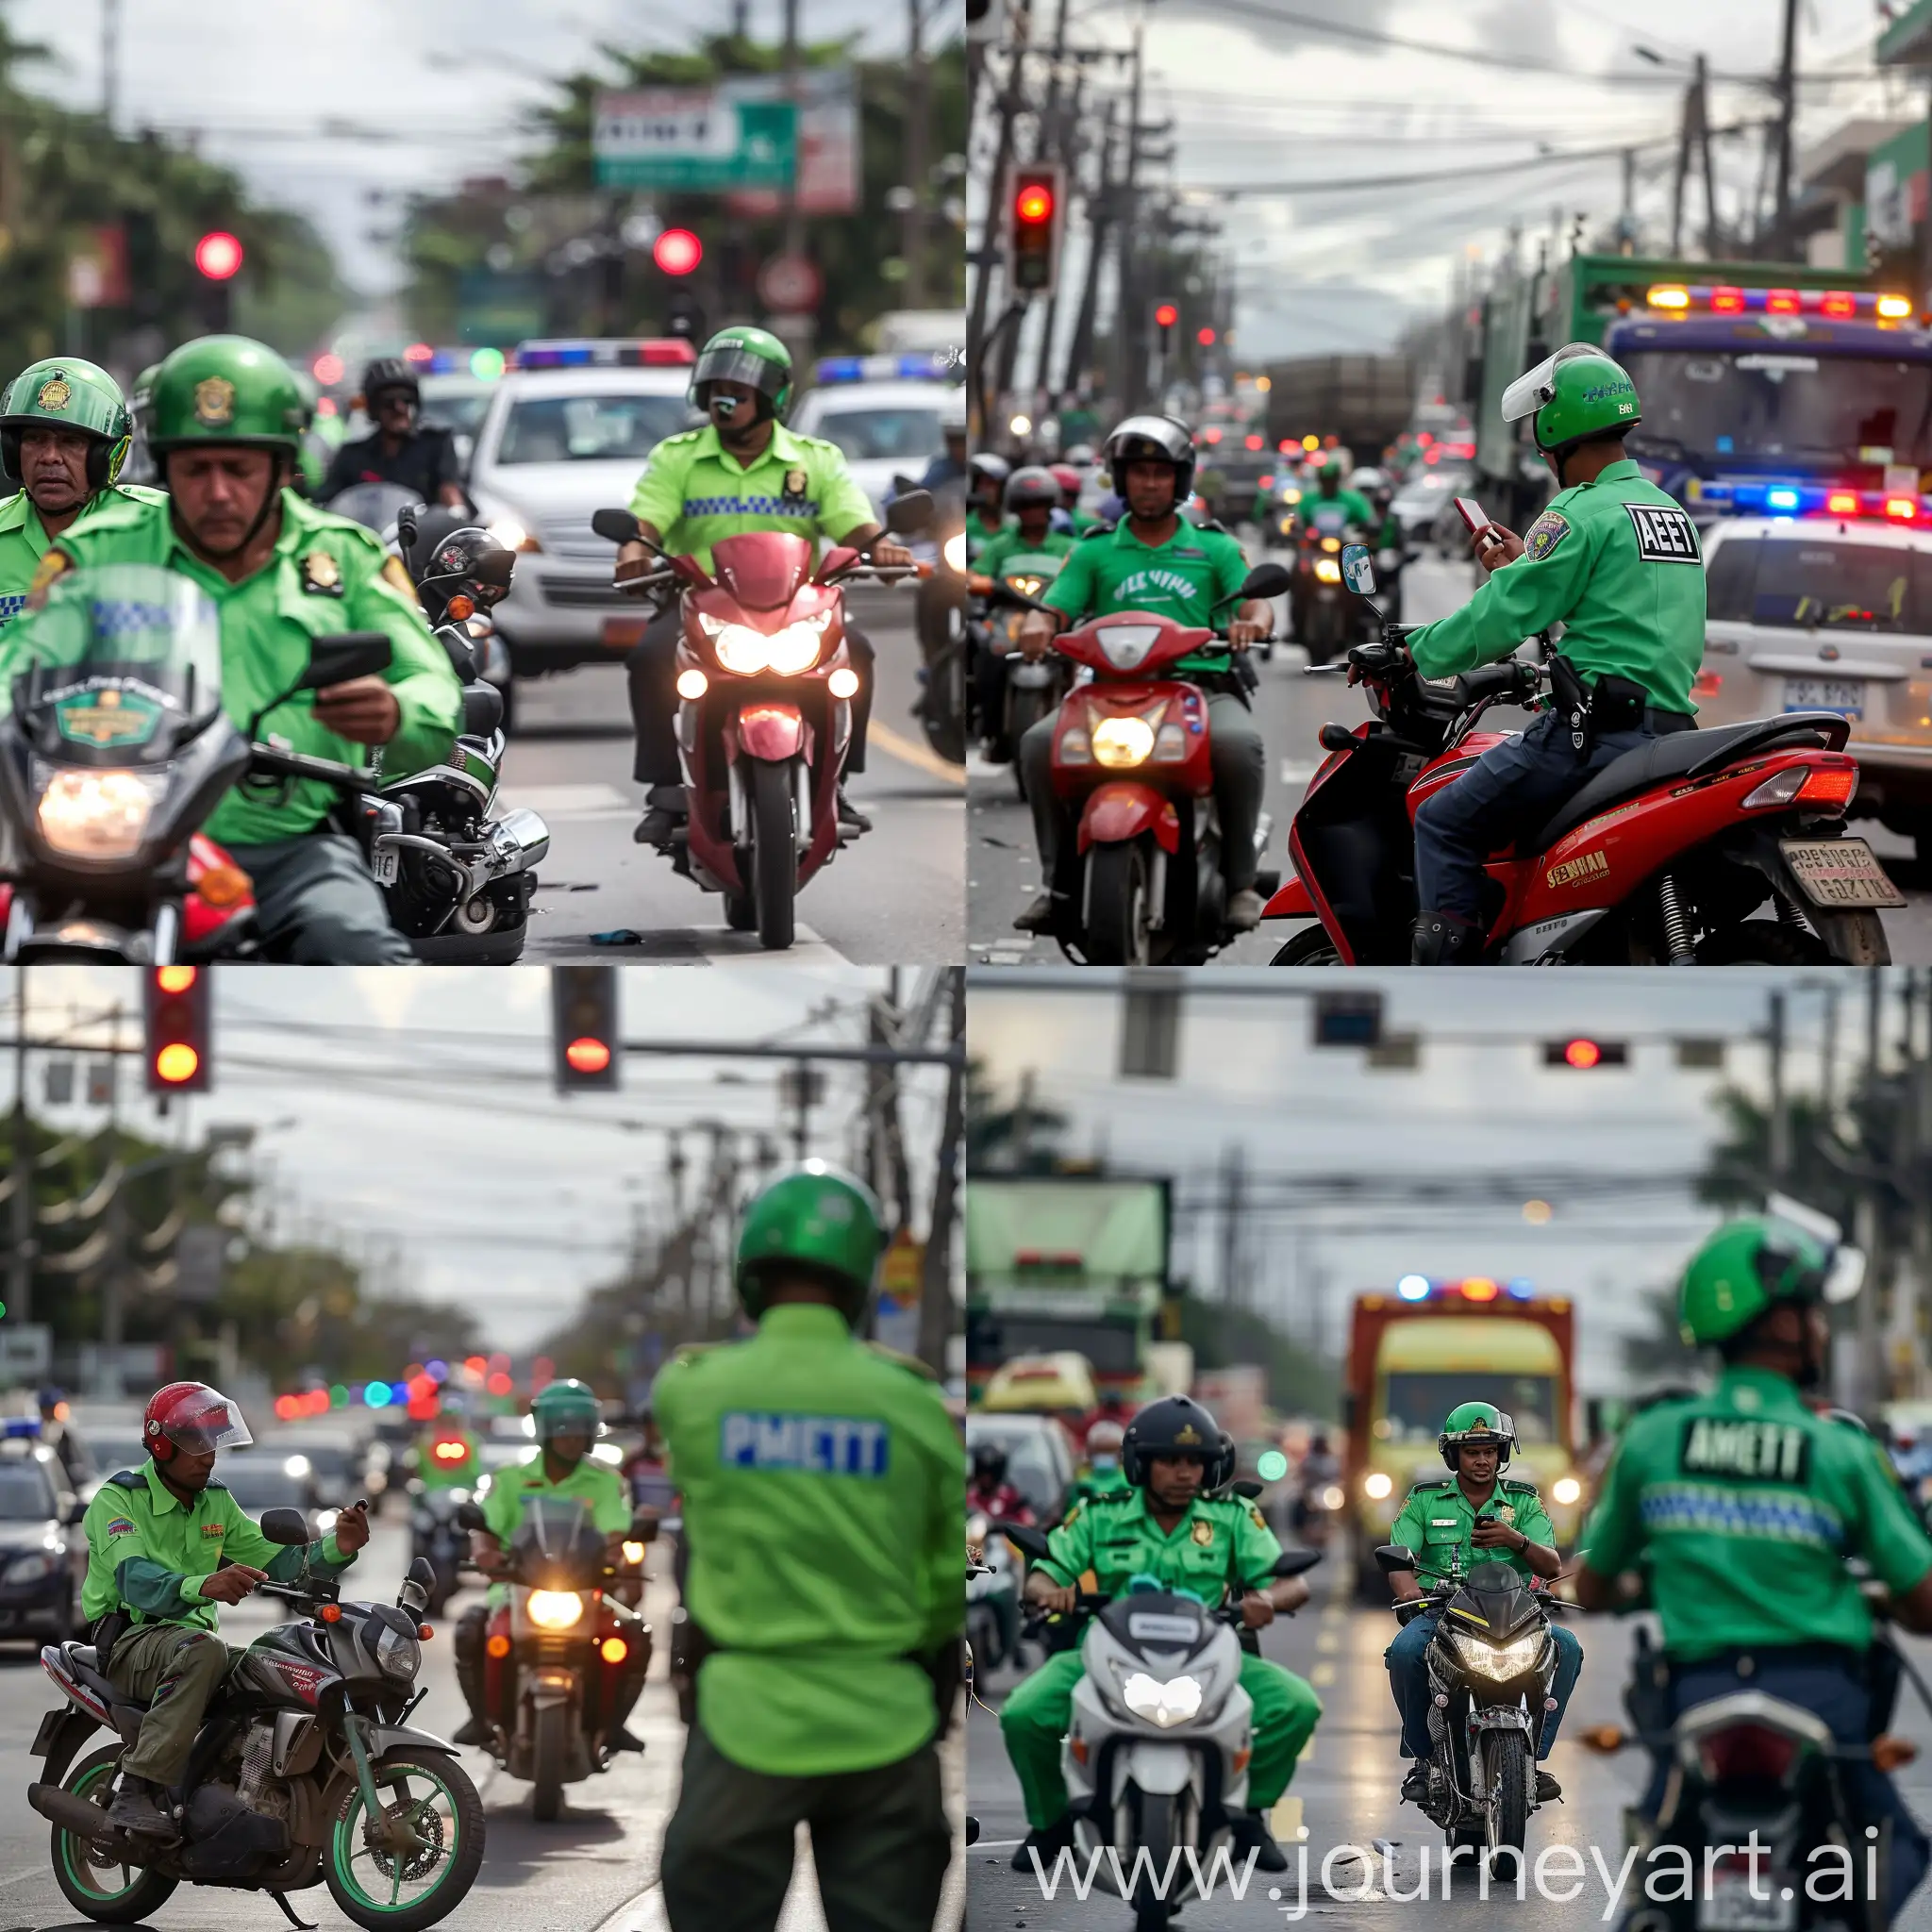 Chaotic-Traffic-Scene-in-Santo-Domingo-with-Motorcyclists-and-Trucks